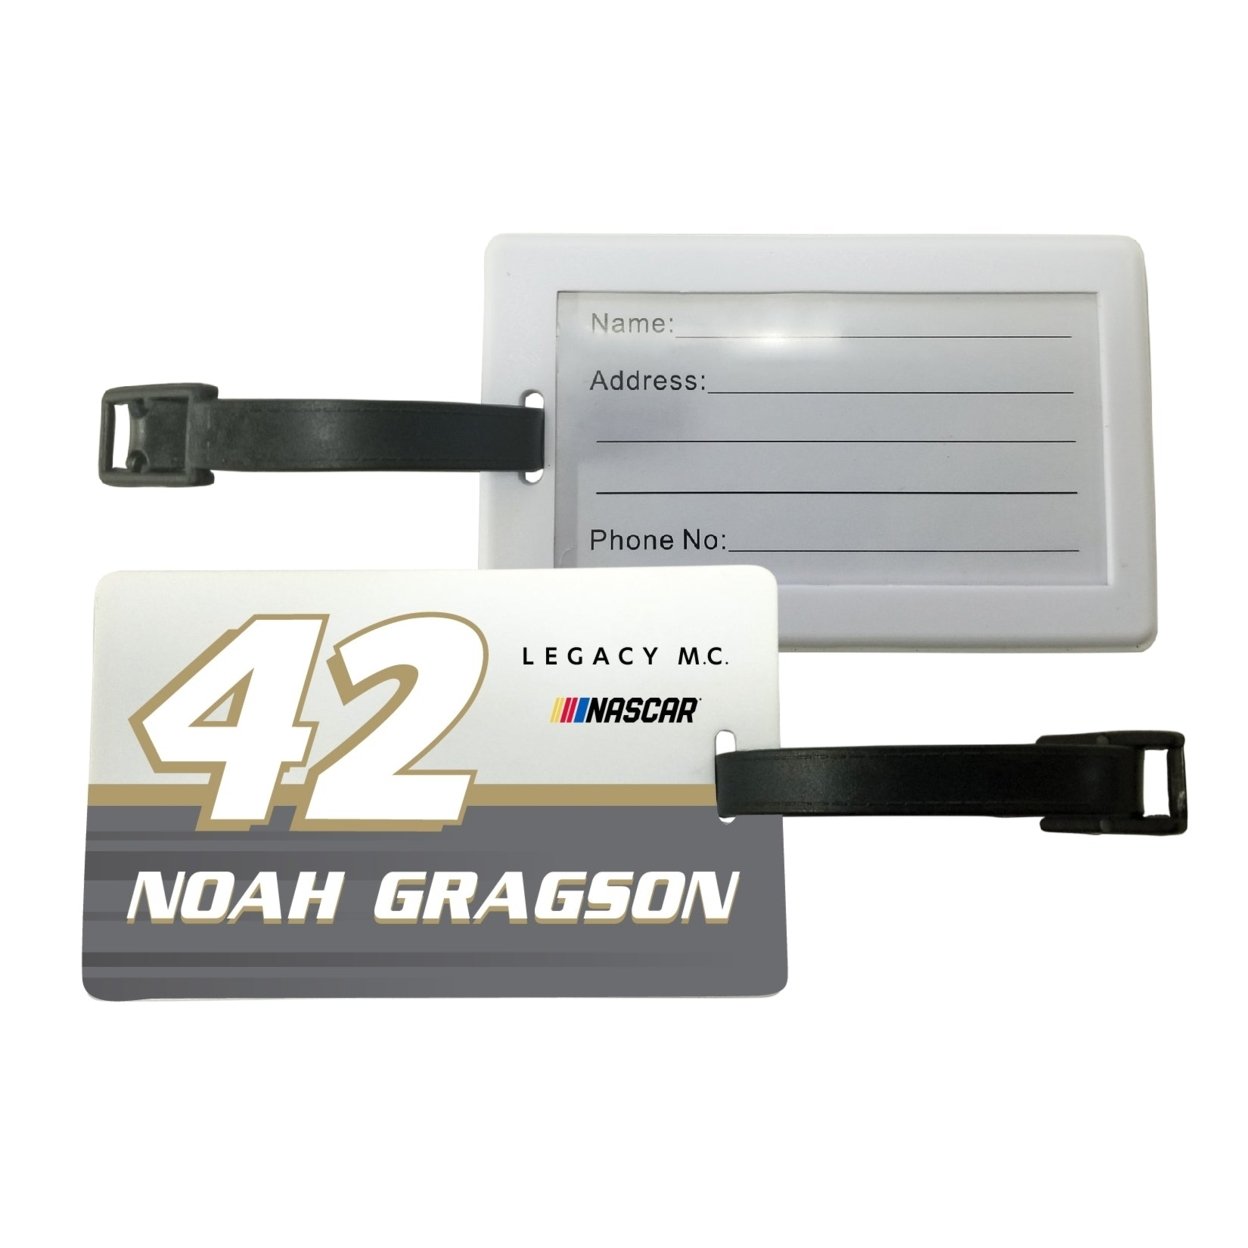 #42 Noah Gragson Officially Licensed Luggage Tag